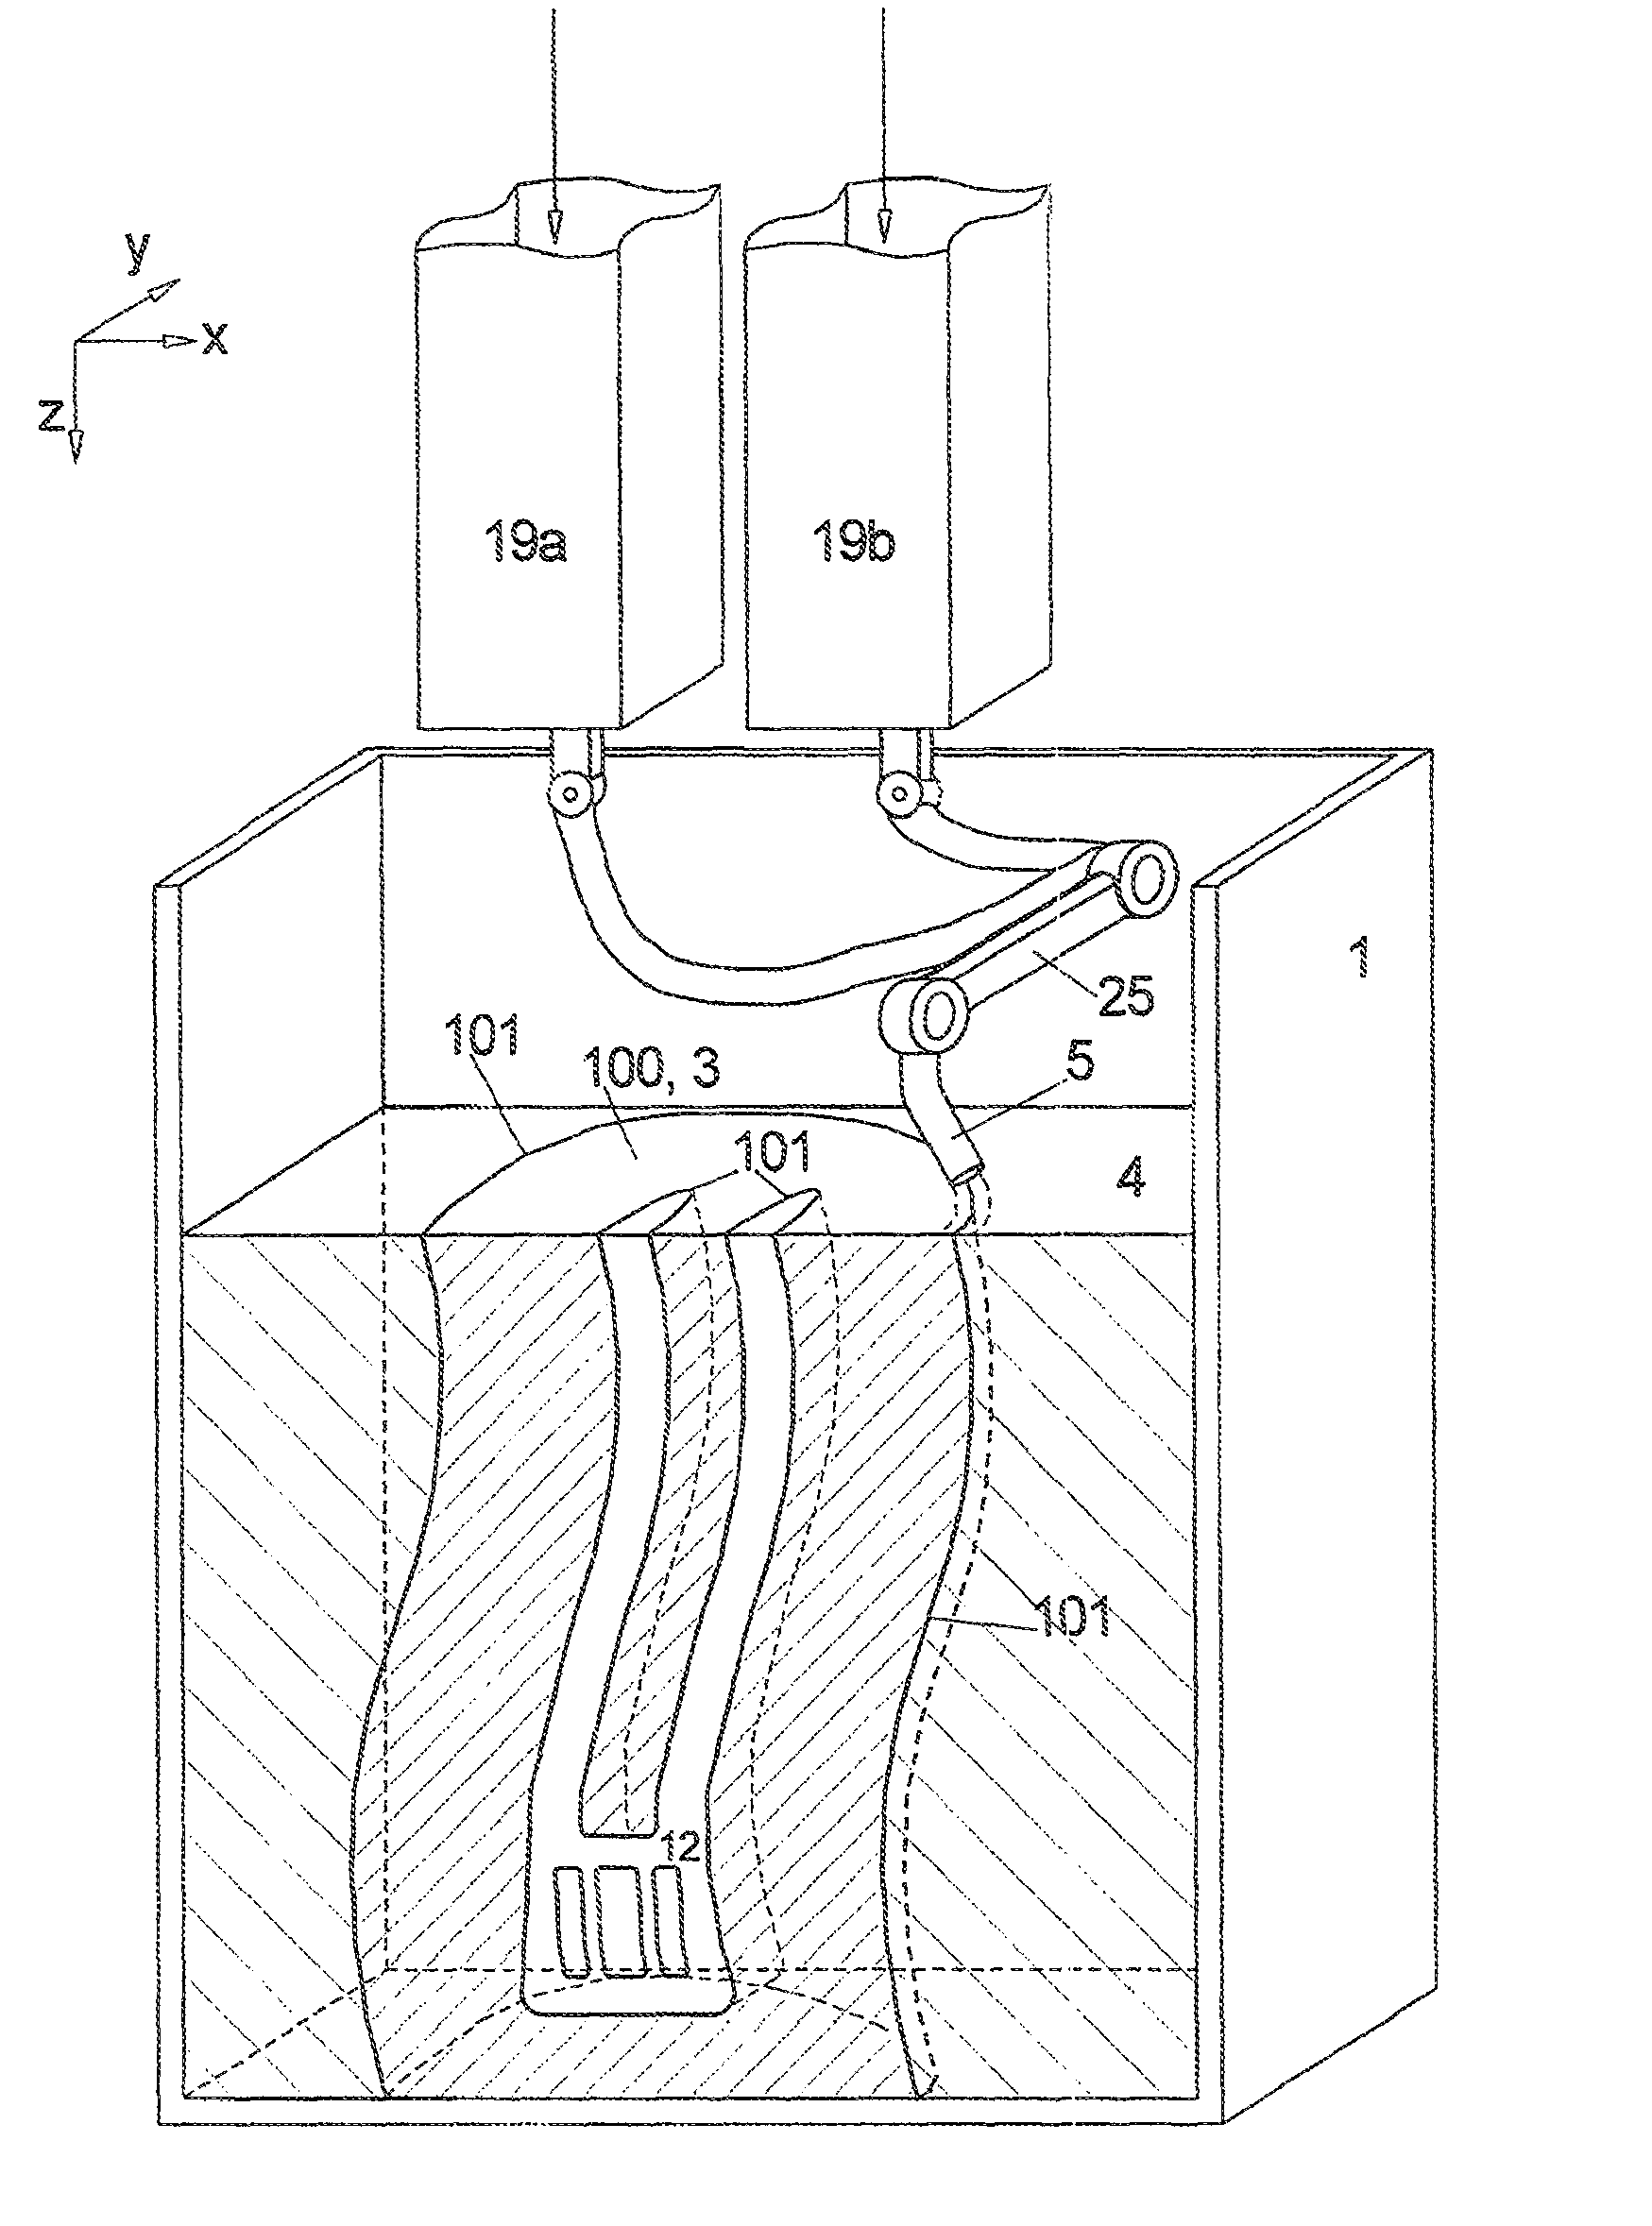 Method and device for layered buildup of a shaped element